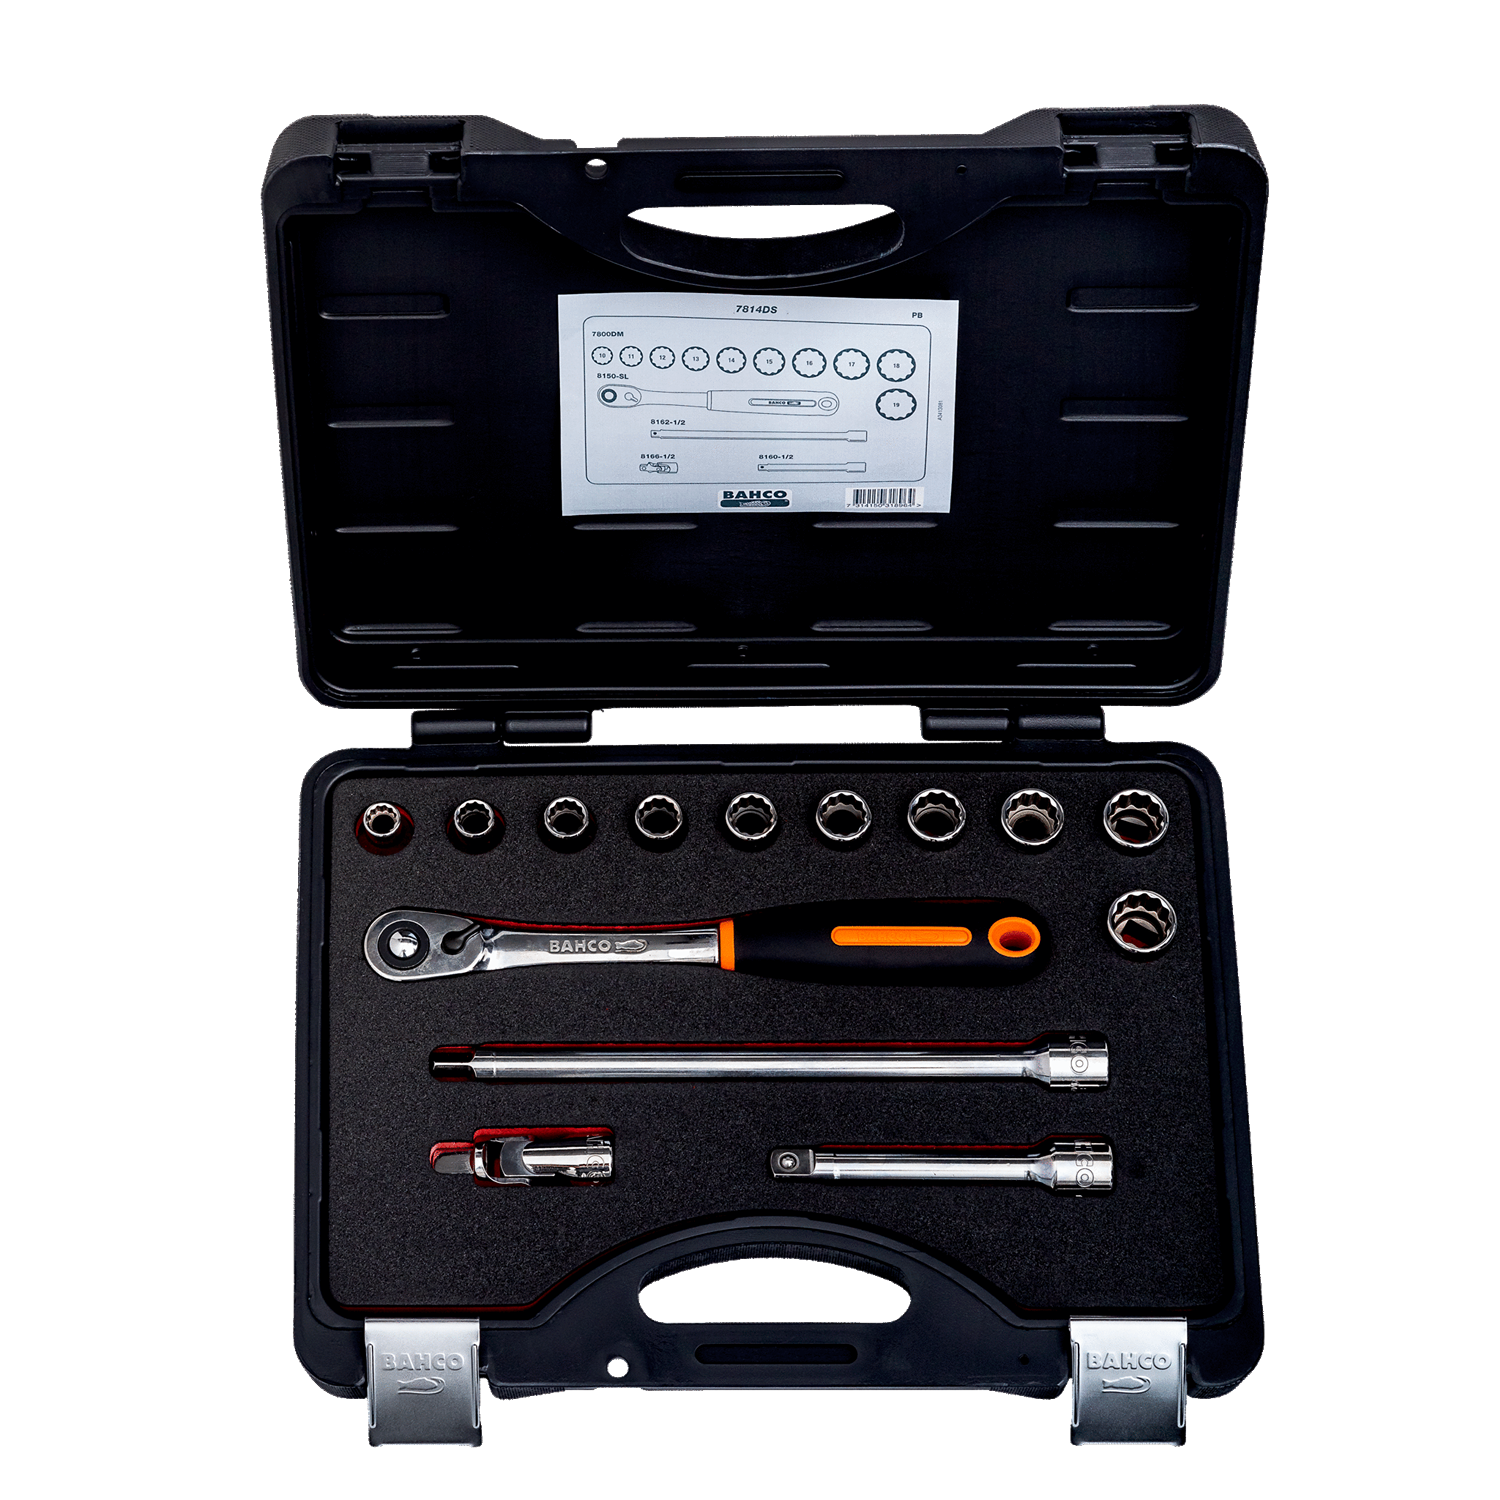 BAHCO 7814DS 1/2” Square Drive Socket Set Ratchet Metal Case - Premium Socket Set from BAHCO - Shop now at Yew Aik.